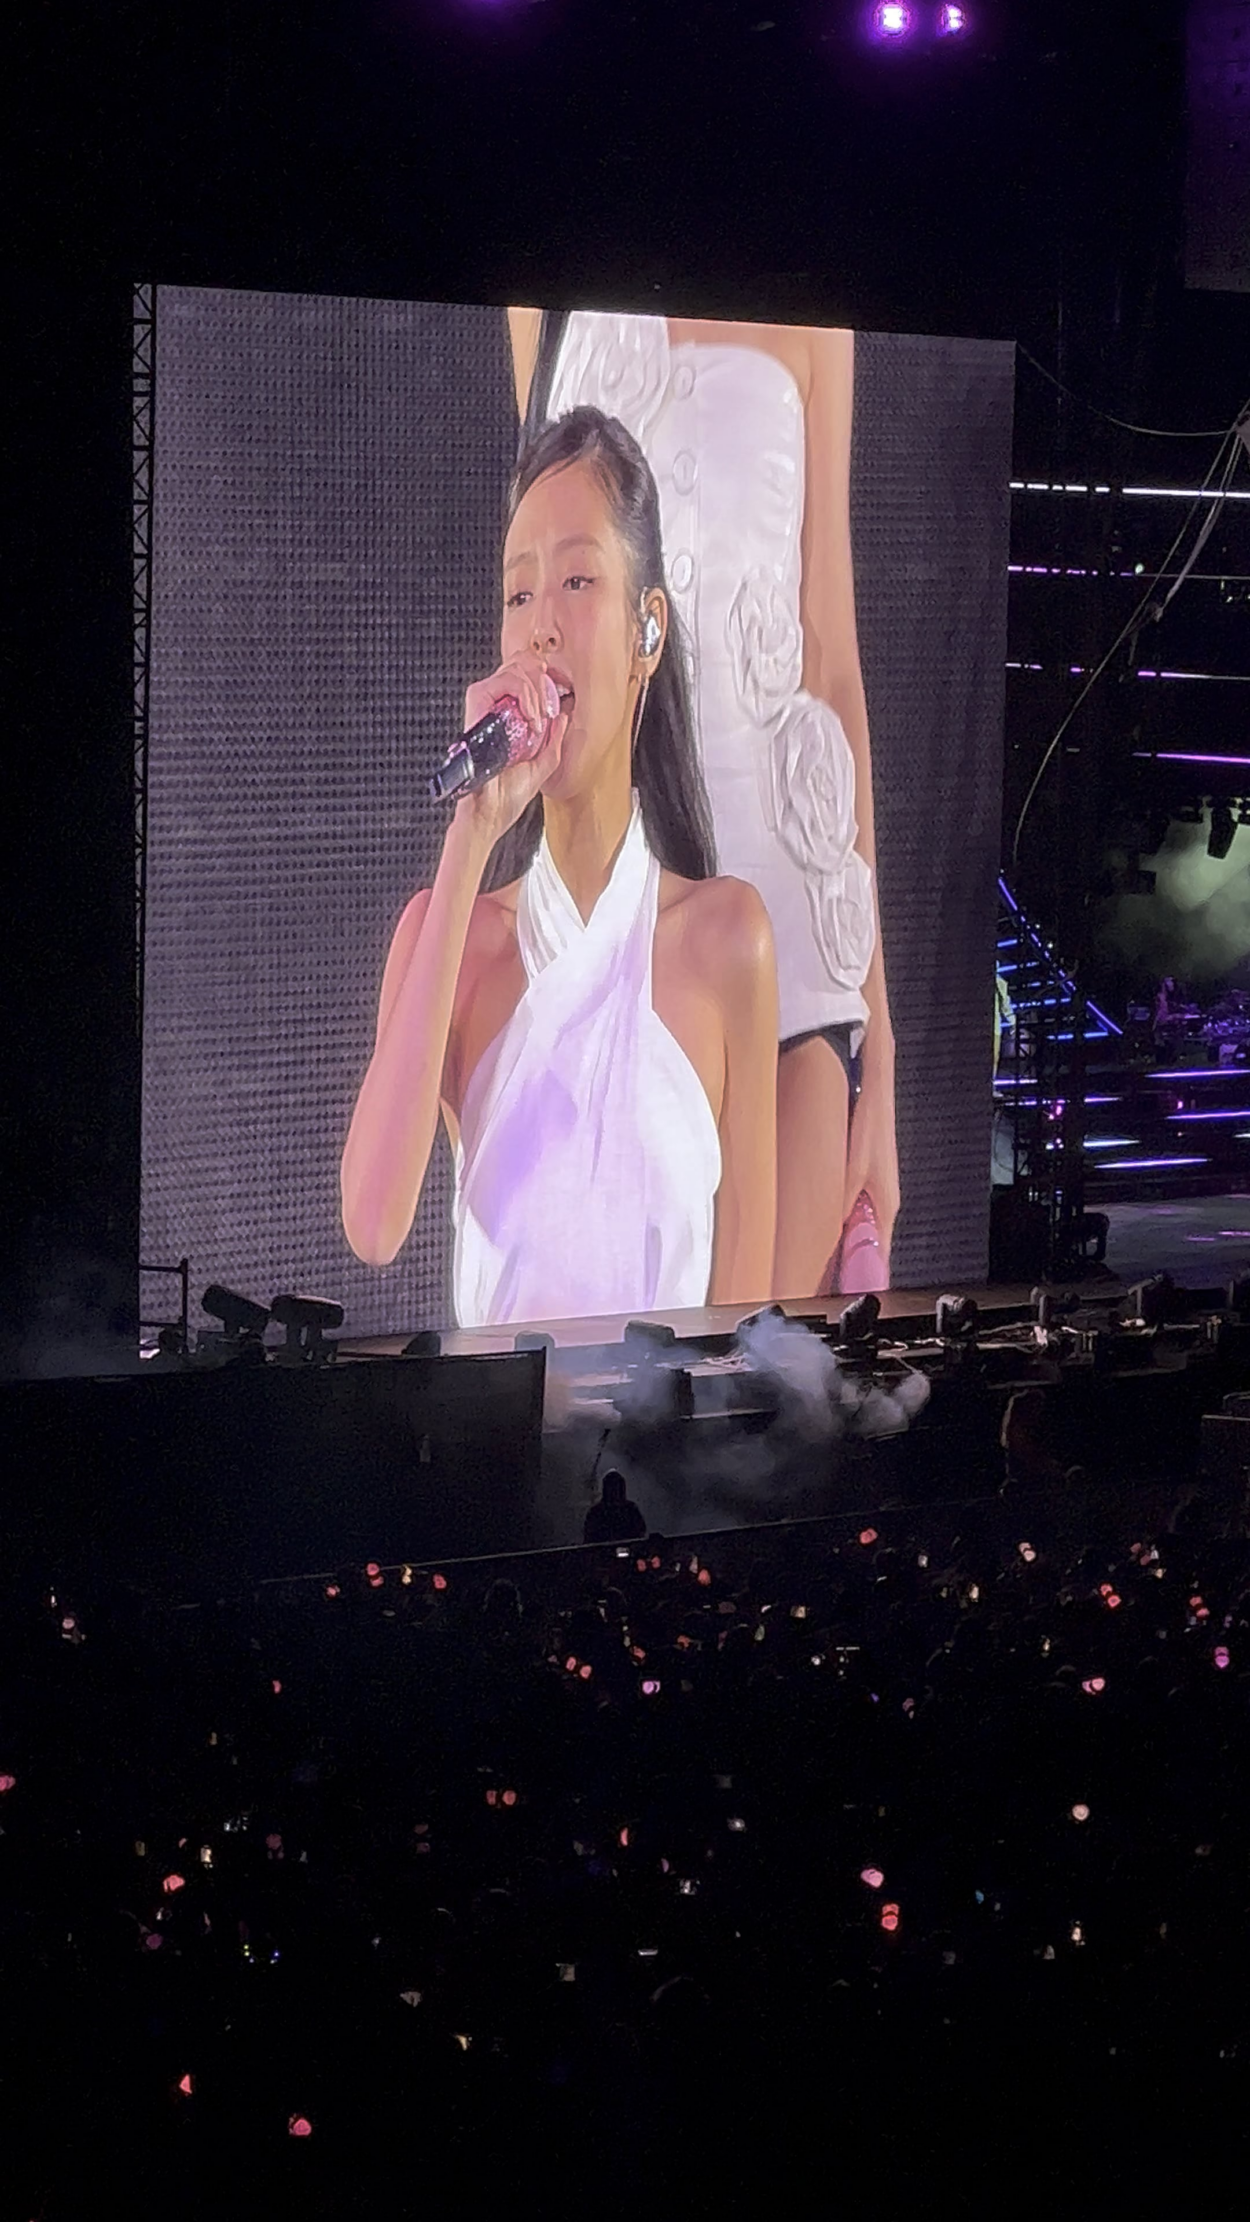 230822 Went to my first ever Blackpink Concert in San Francisco. Took this video. Unreal experience. Will cherish this feeling for a lifetime!